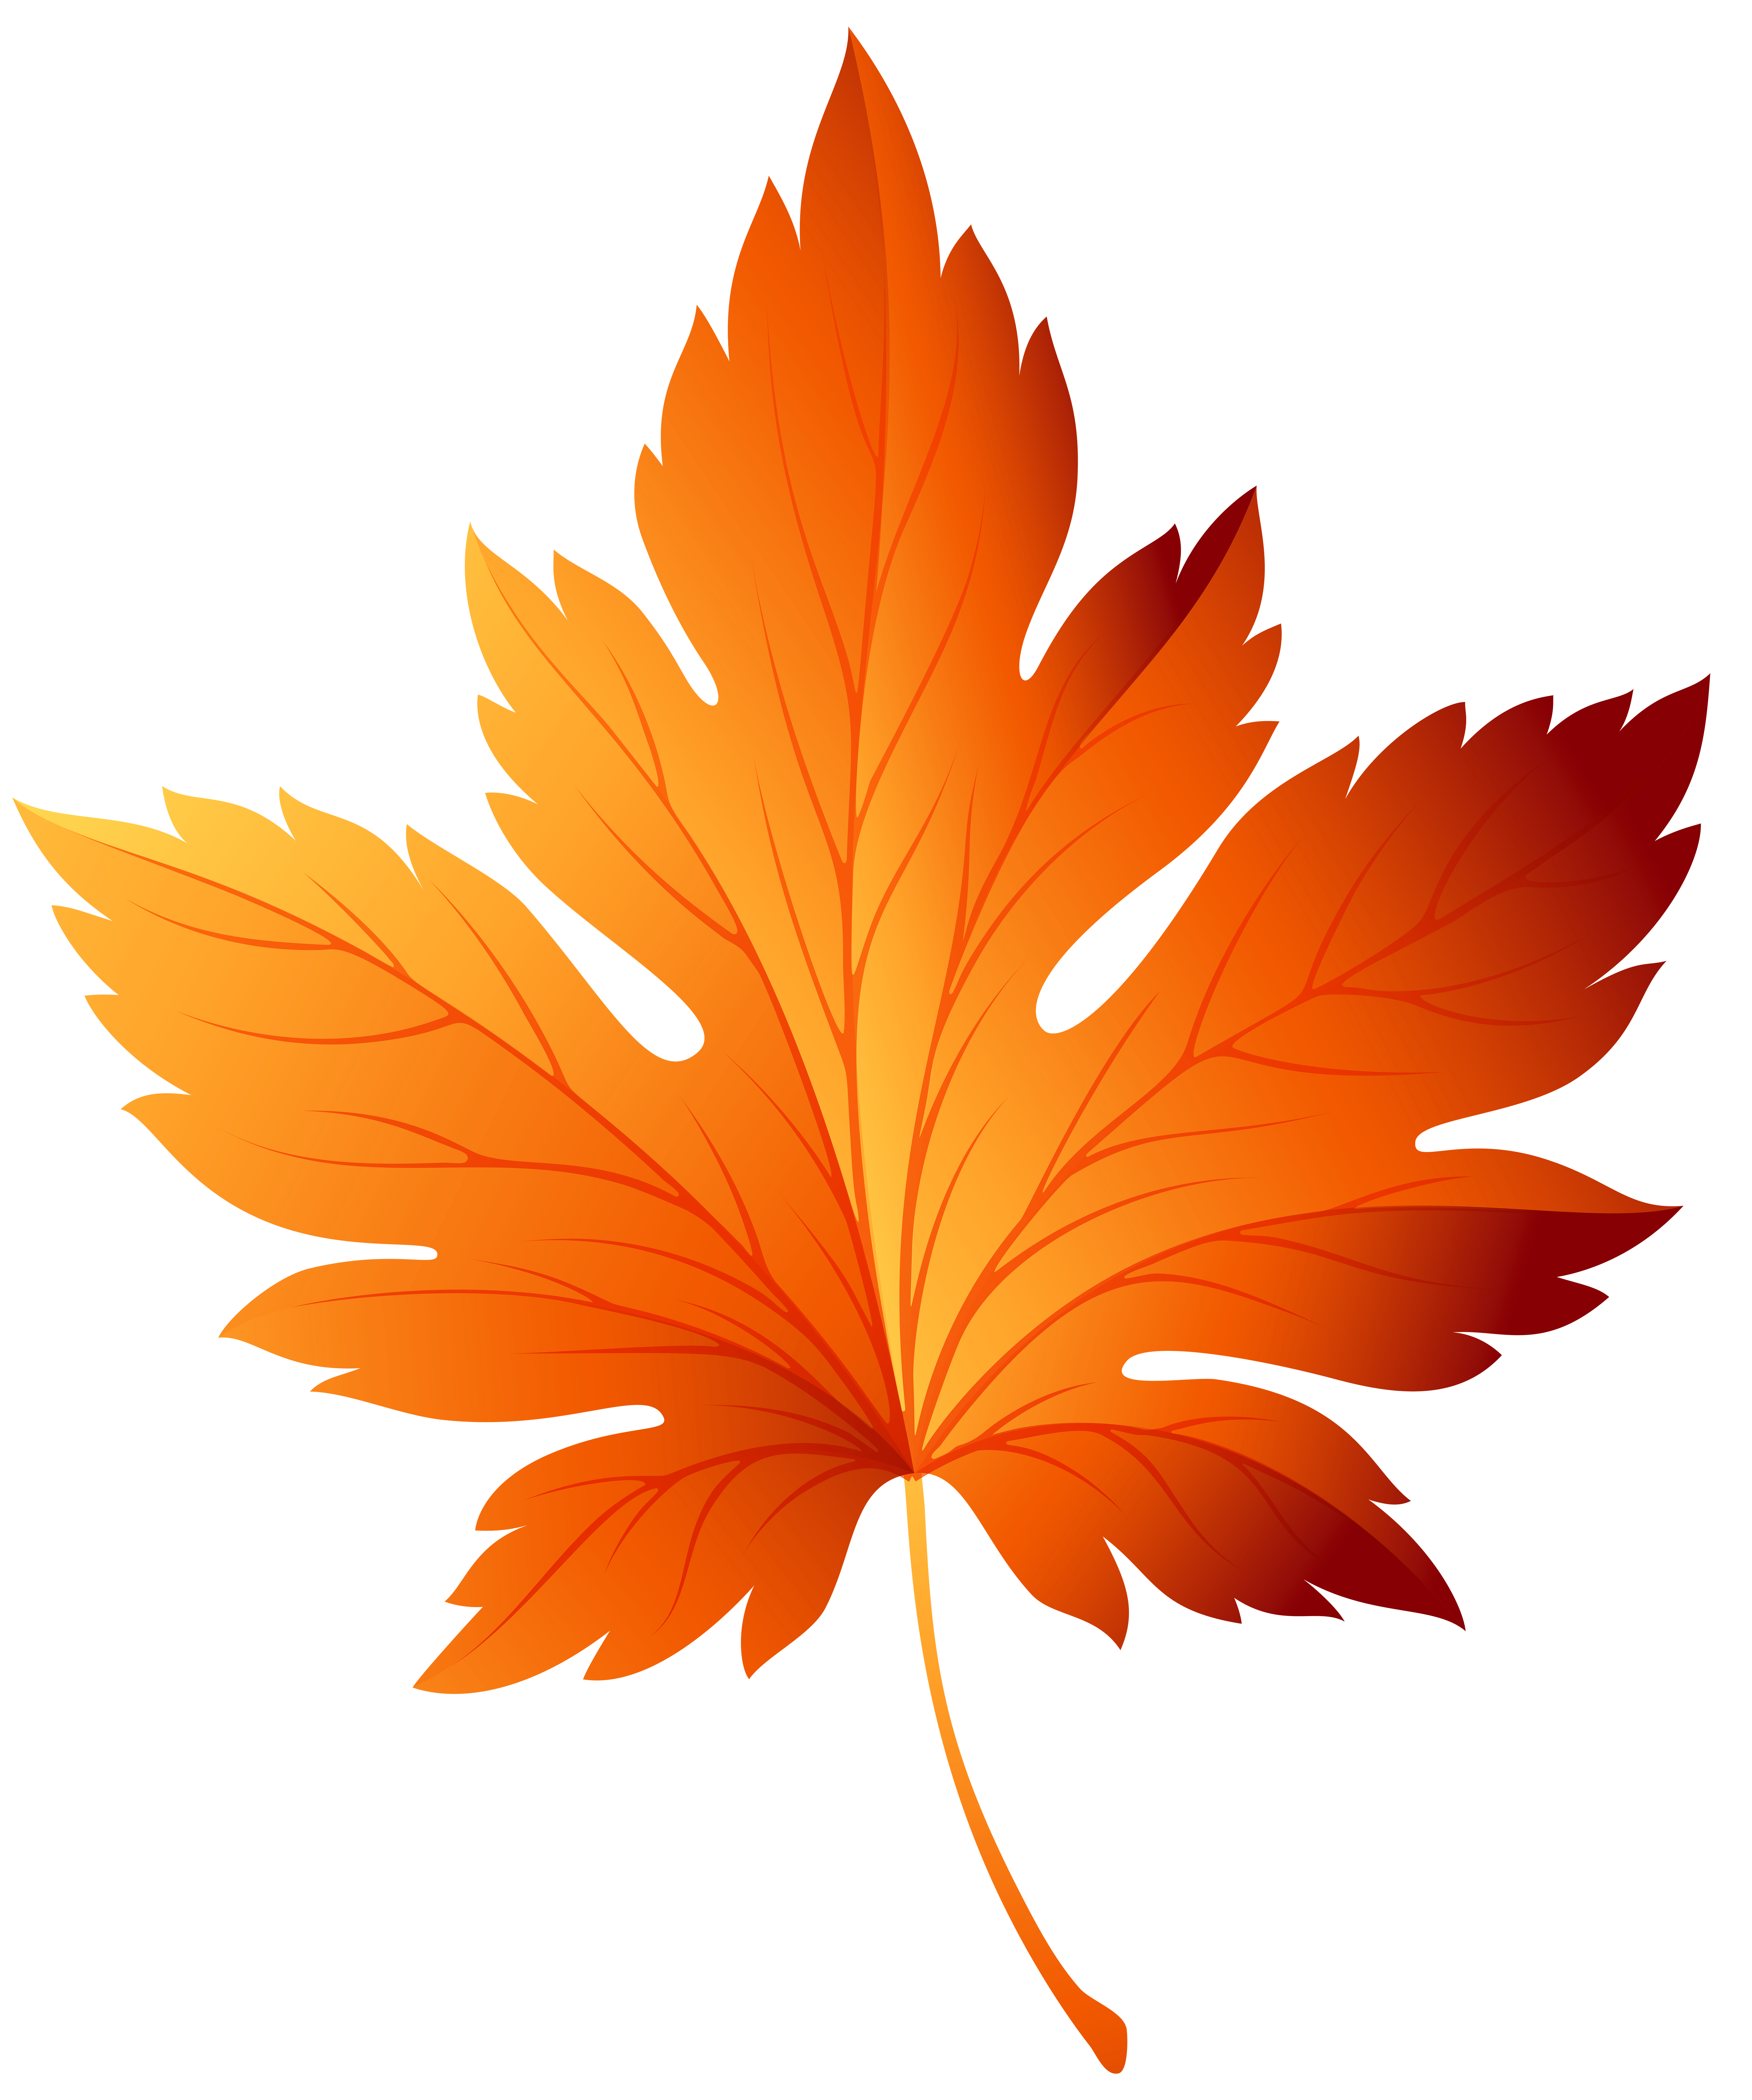 falling autumn leaves png